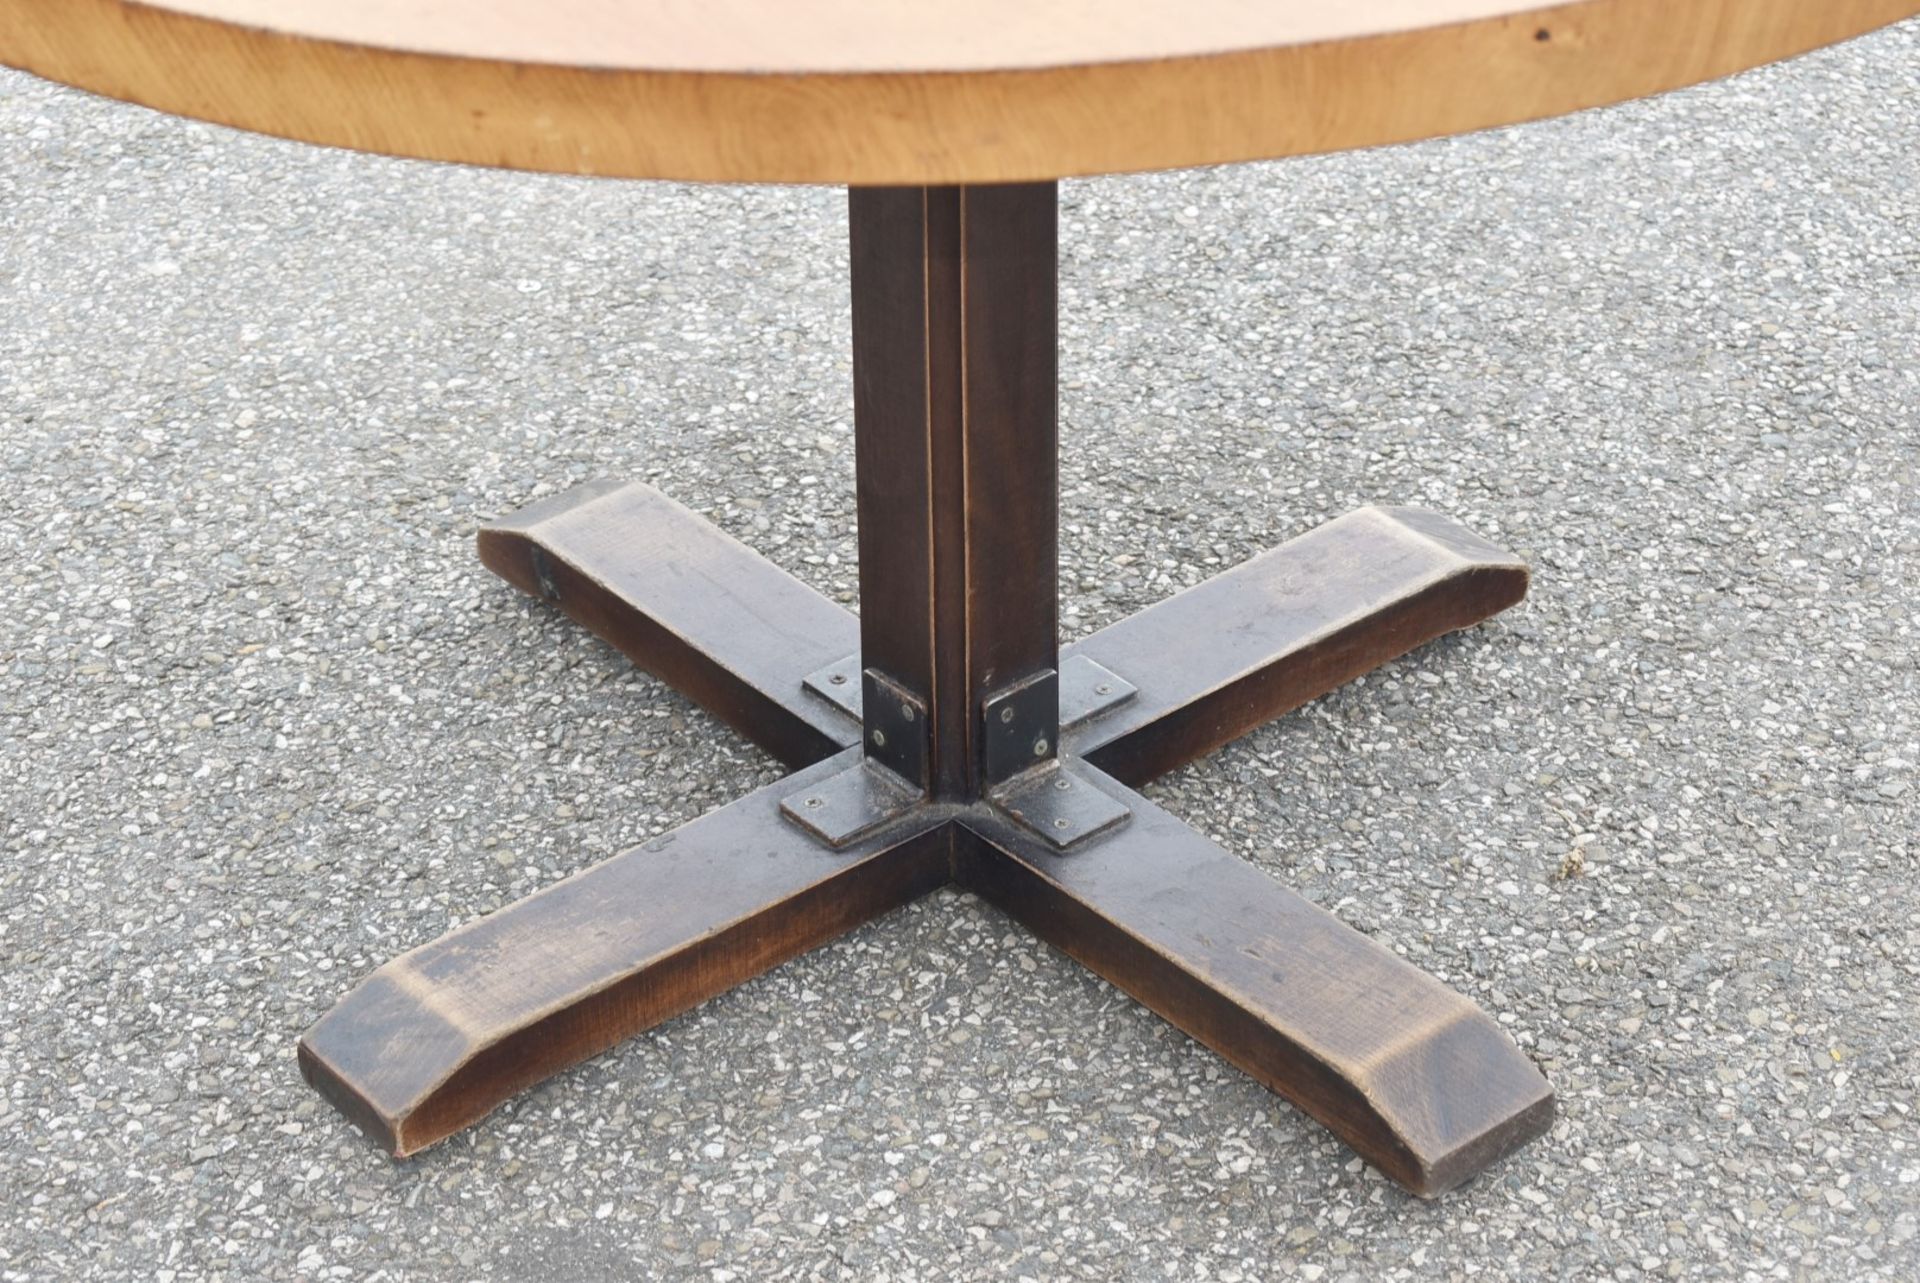 1 x Solid Oak 120cm Round Restaurant Table - Natural Rustic Knotty Oak Tops With Rustic Timber Base - Image 2 of 6